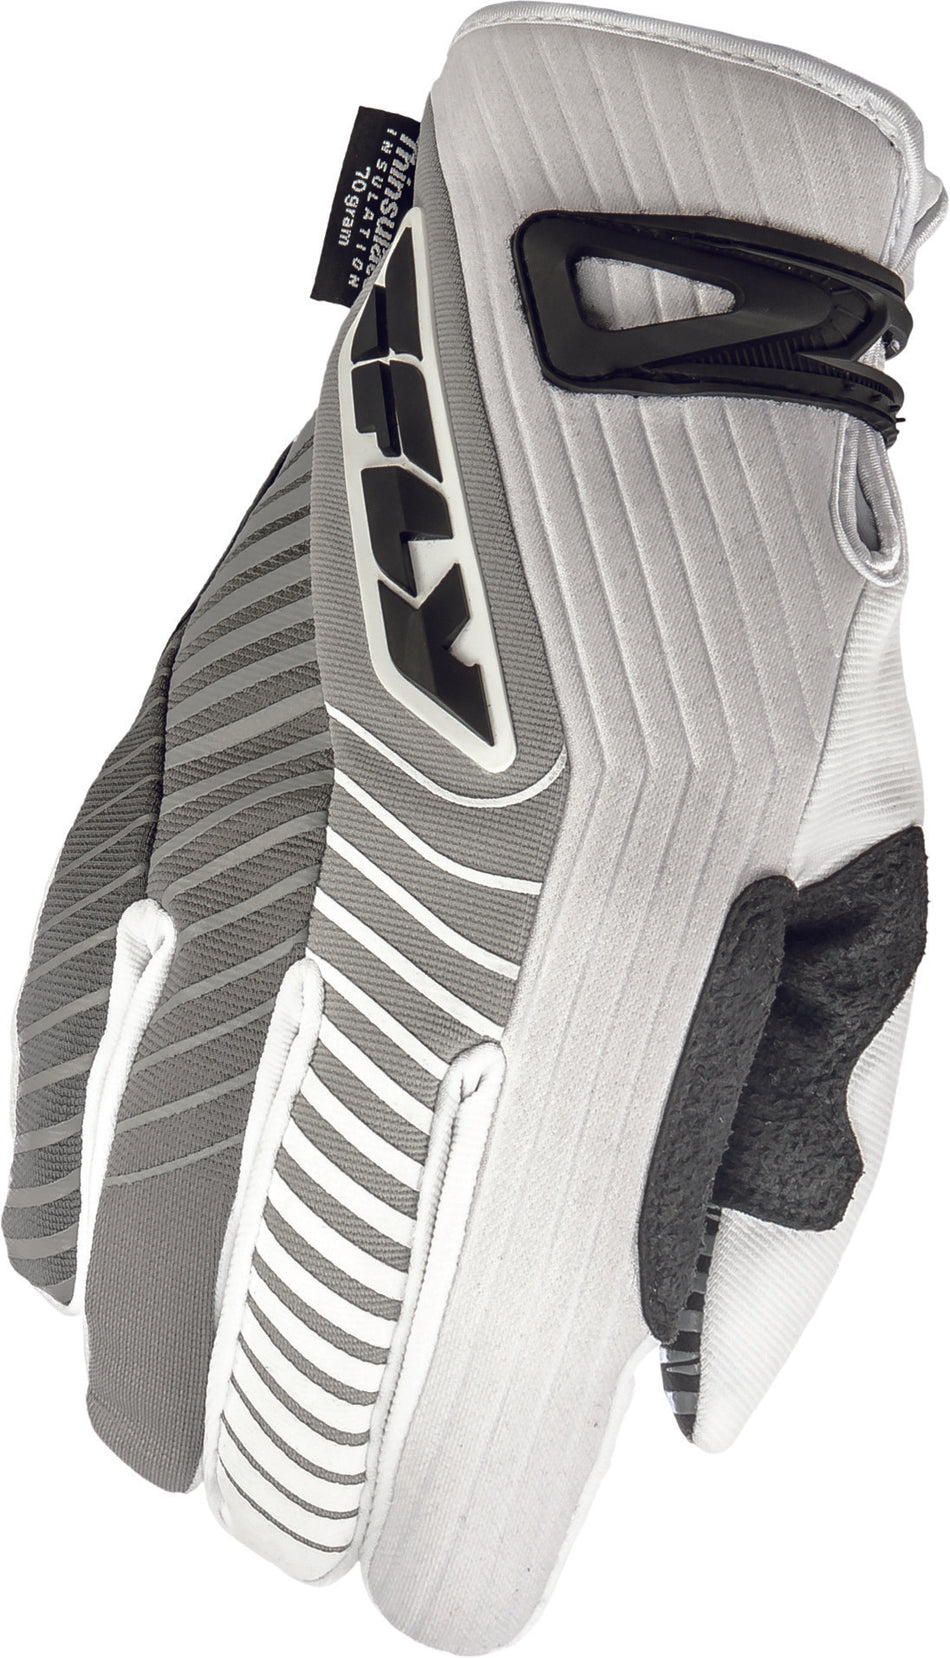 FLY RACING Title Gloves Long White Sz 10 #5884 367-034~10